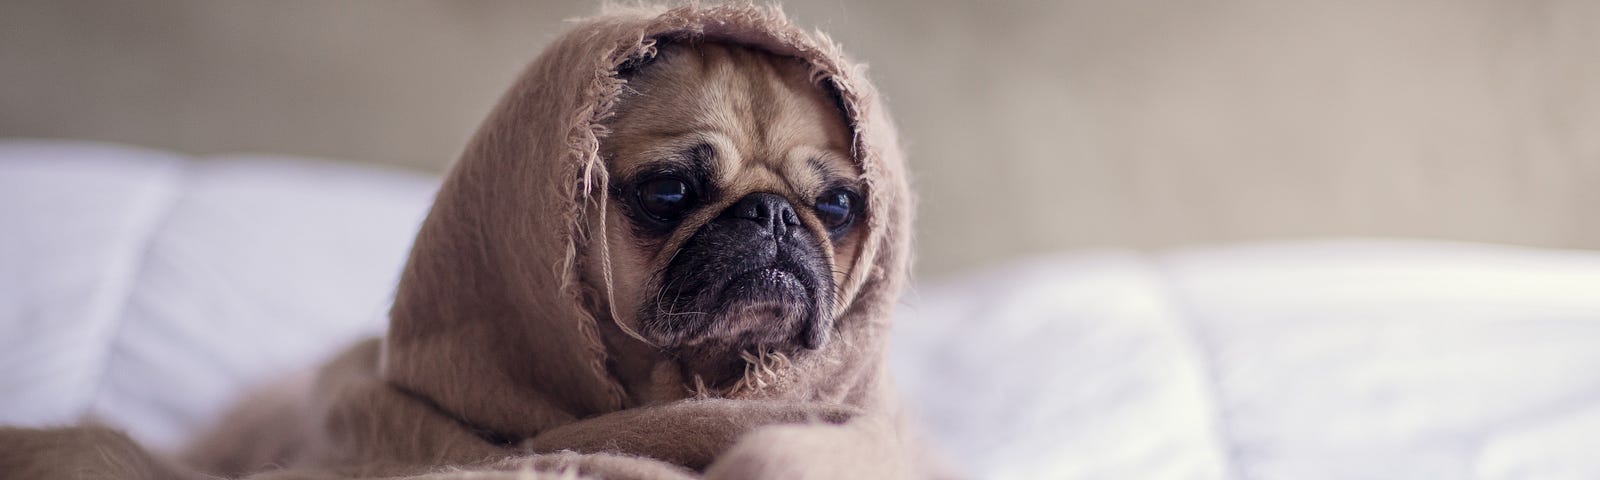 Very sad doggo wrapped in a blankey to ward off the bad vibes of your conversation